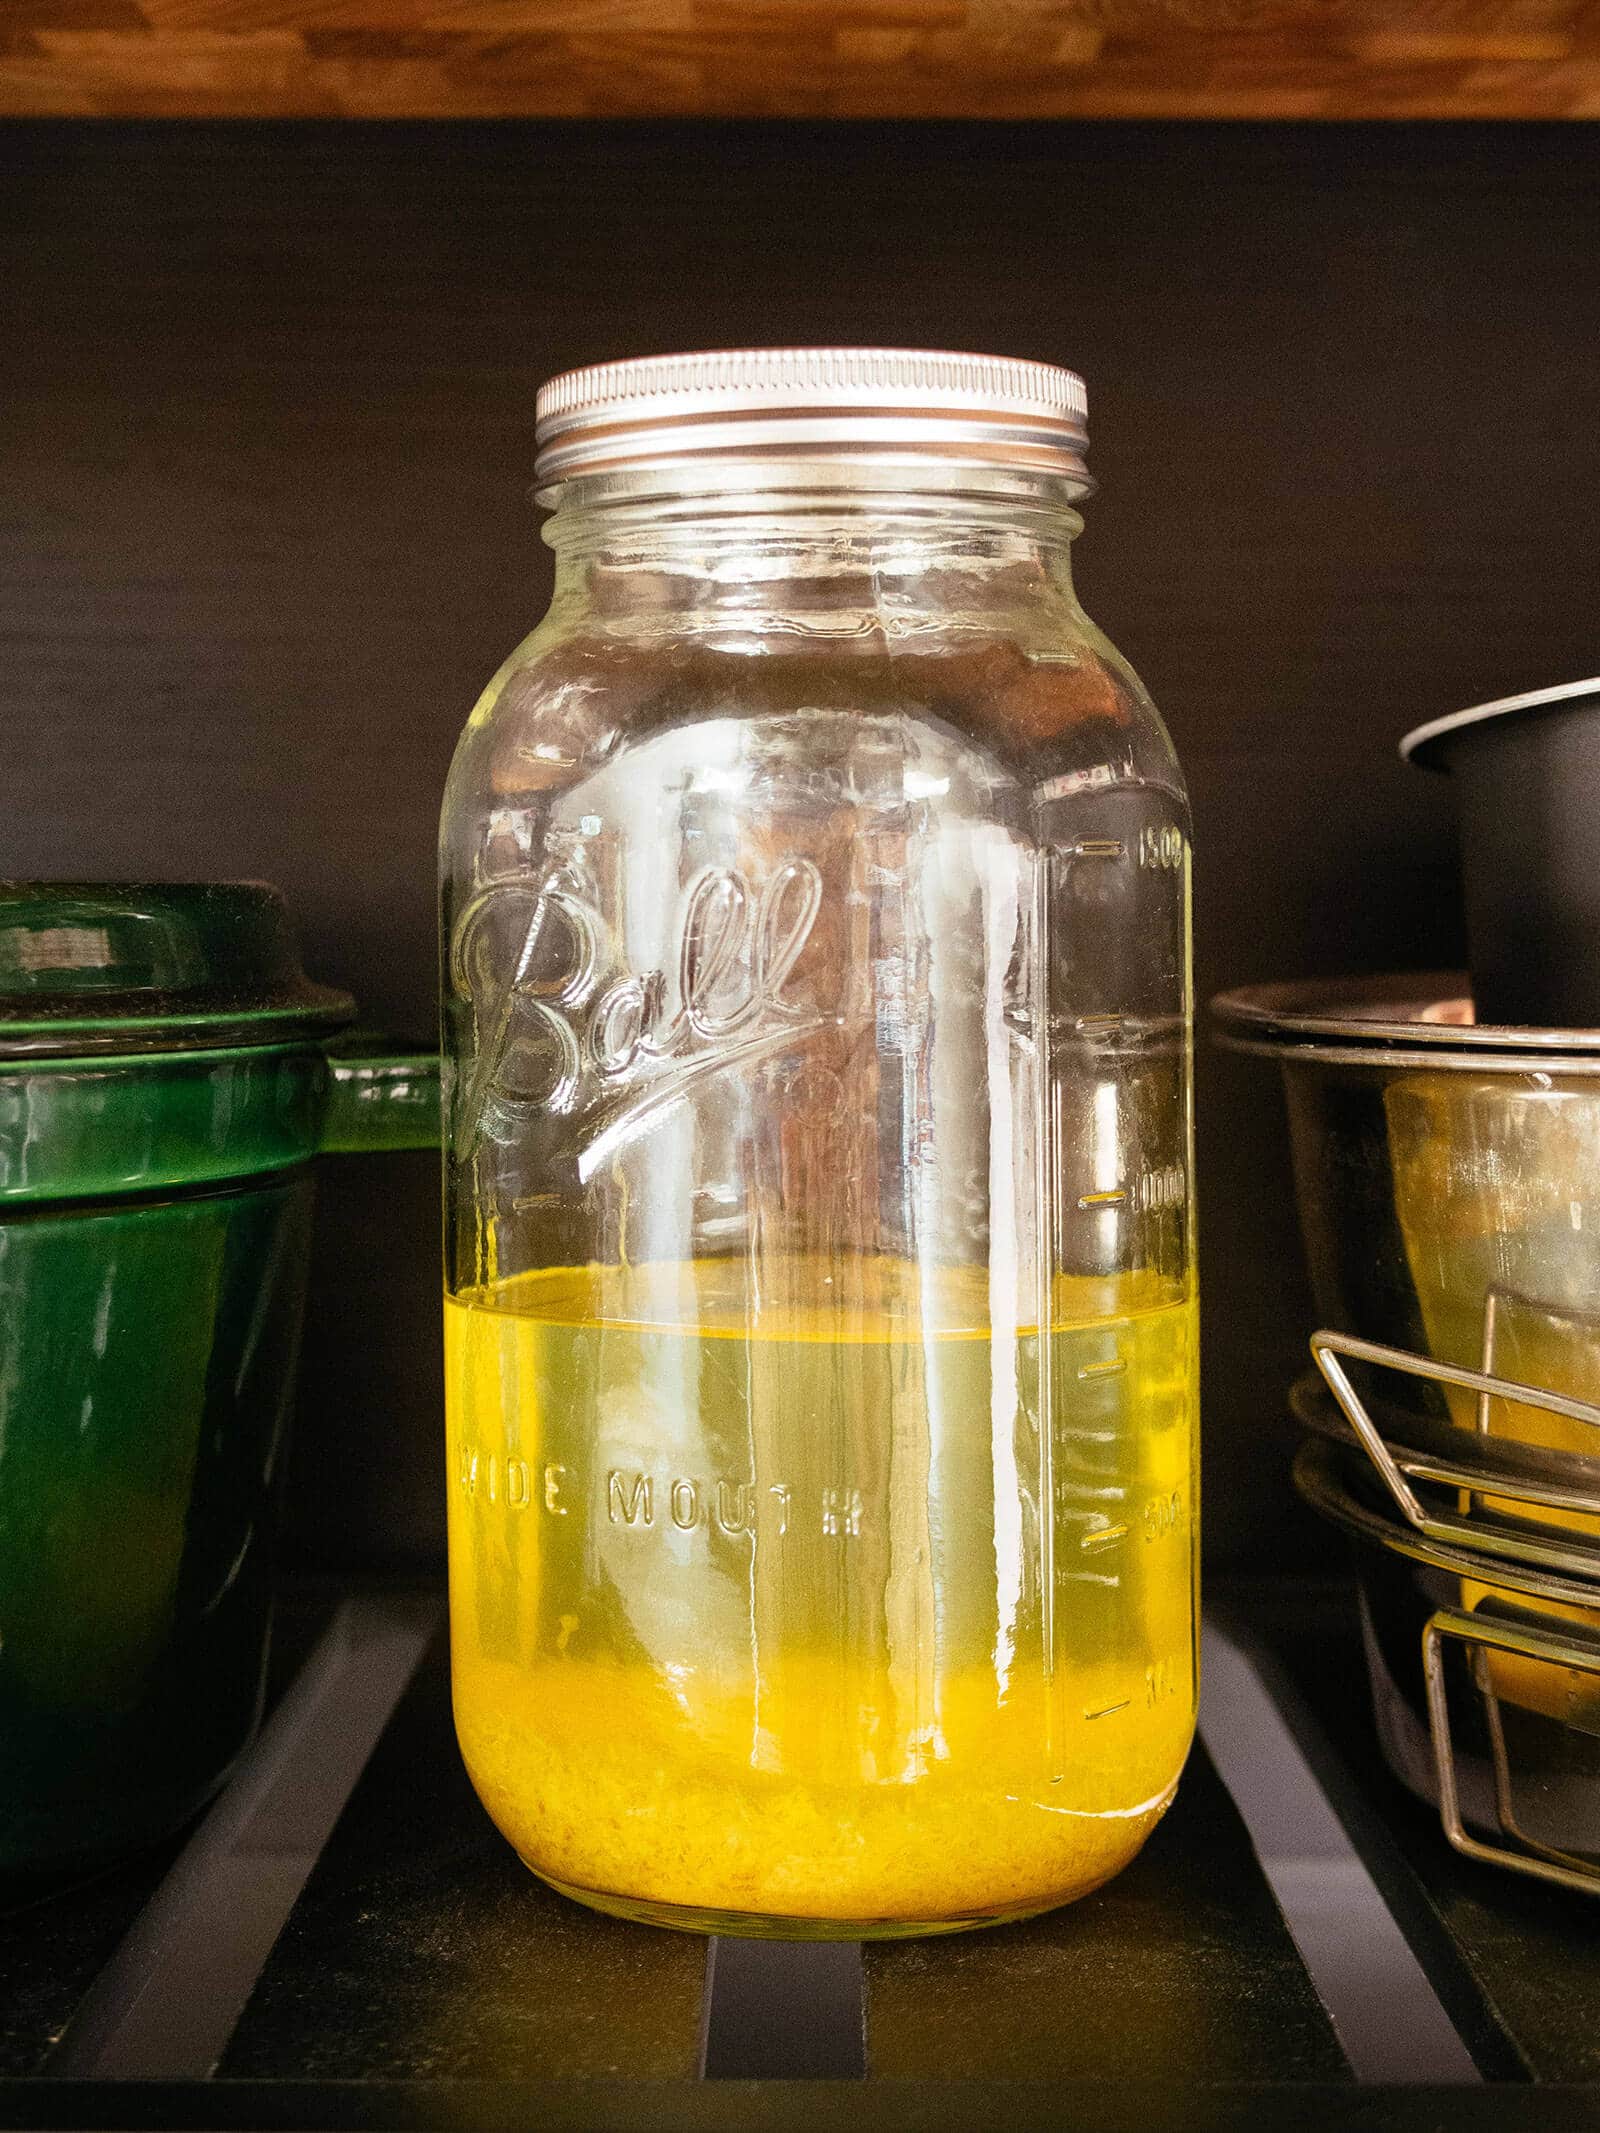 Jar of Everclear alcohol being infused with lemon zest